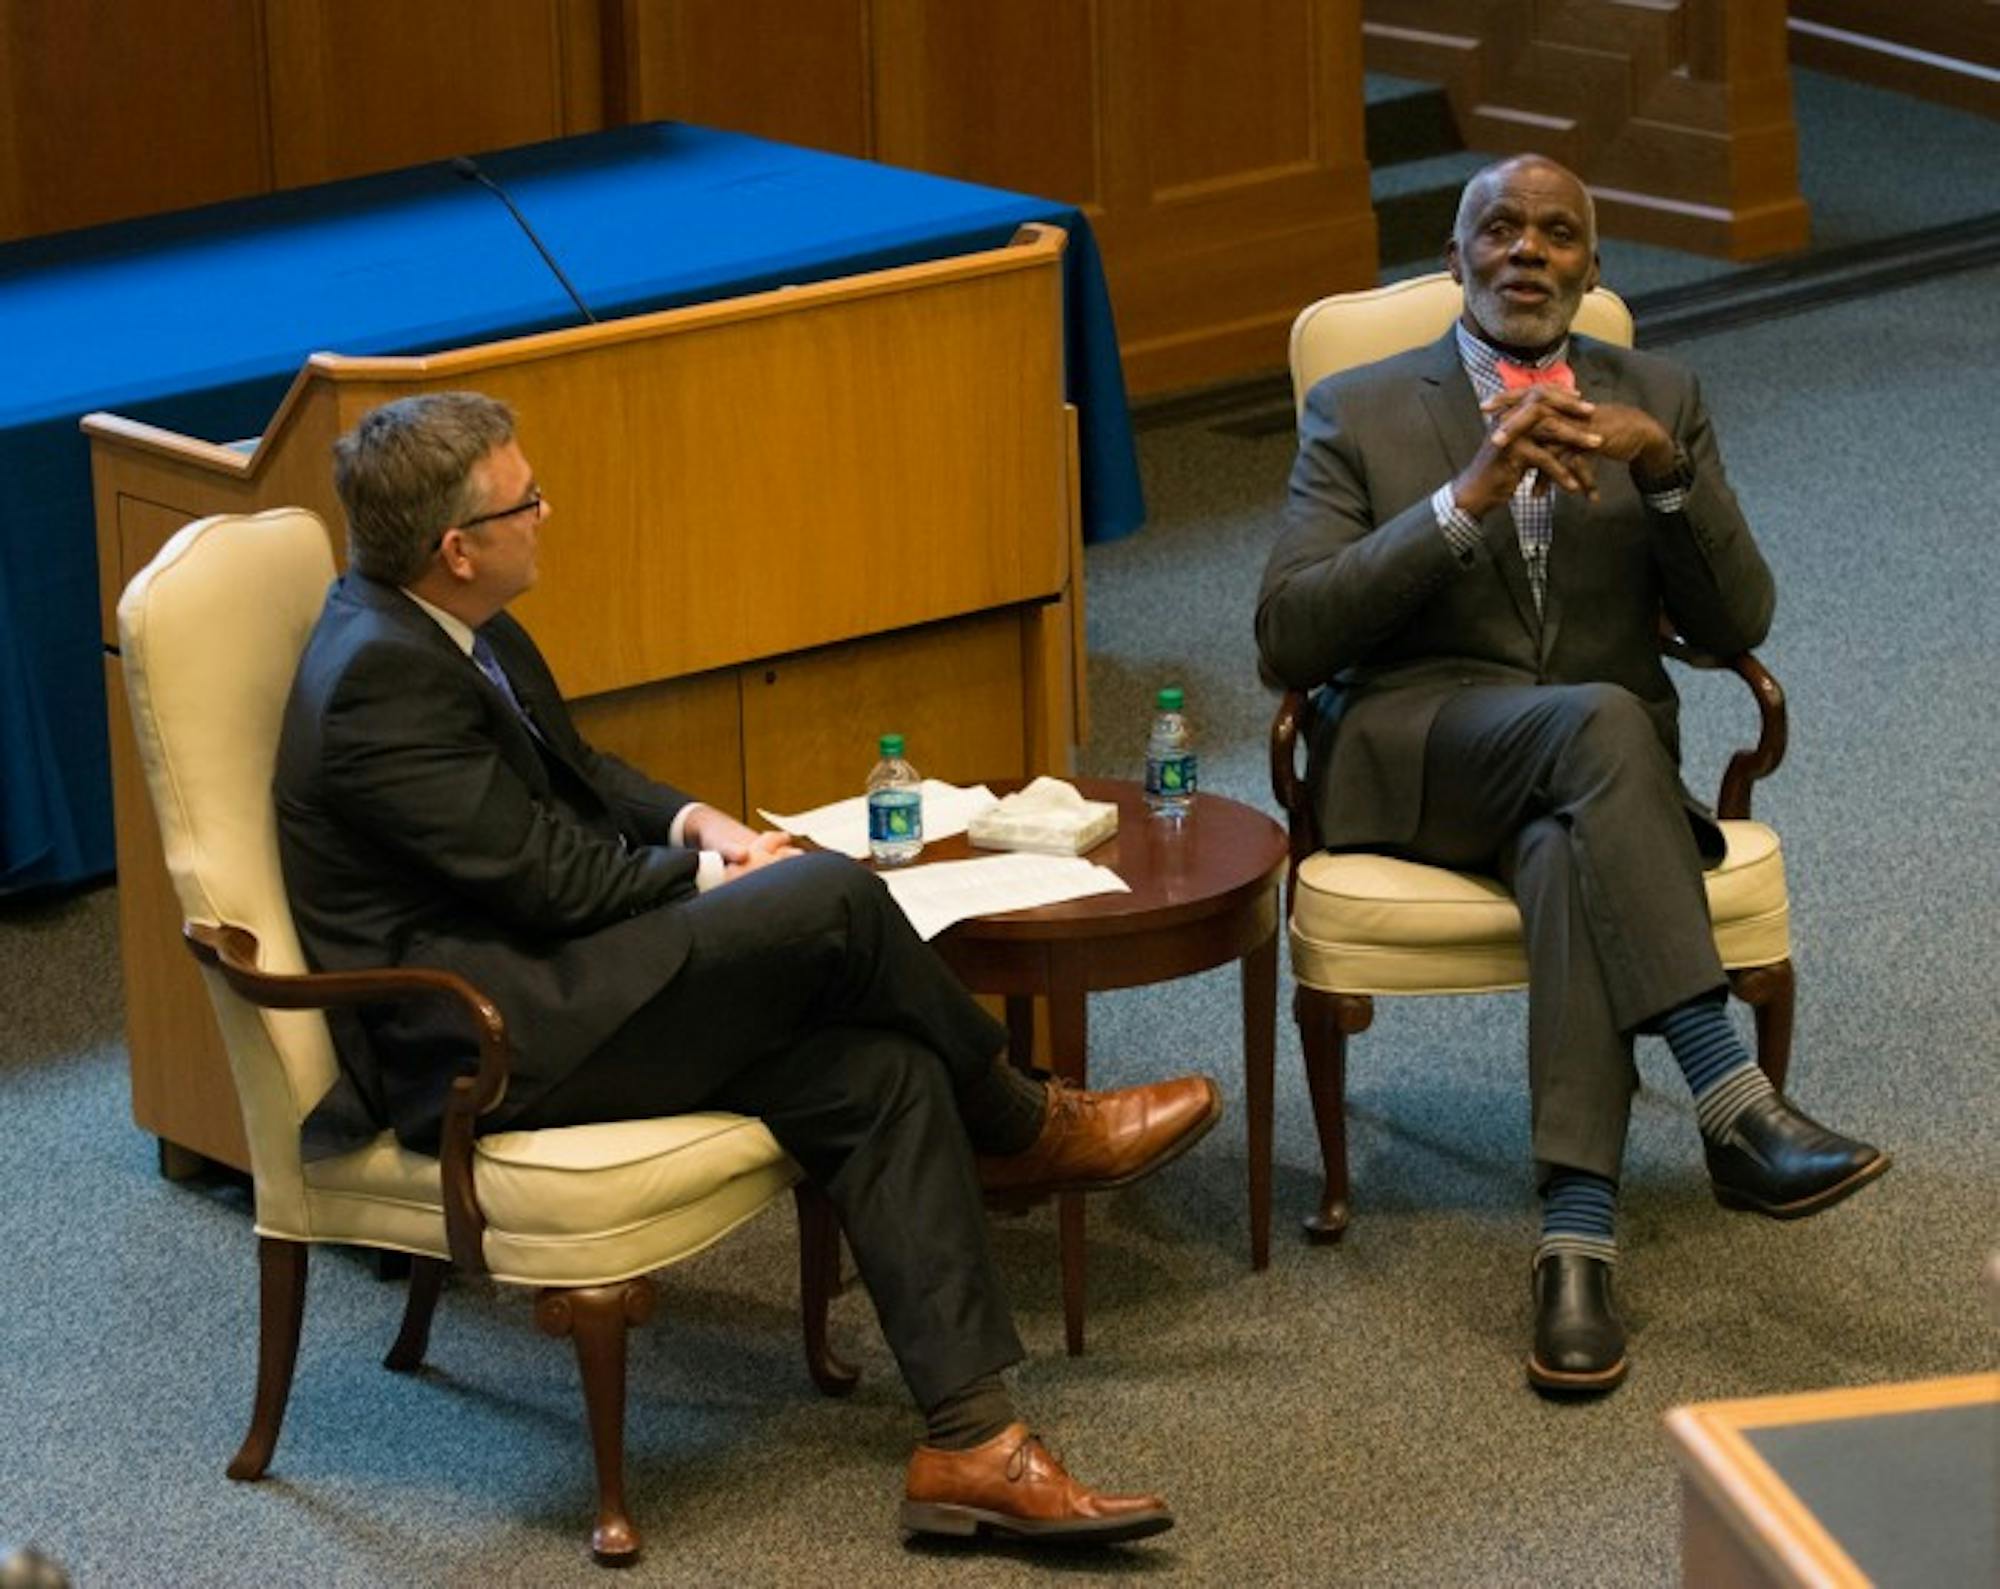 Former Minnesota Supreme Cour justice and Notre Dame alum Alan Page responds to a question from Mark McKenna, associate dean for faculty research and development in the Law School.